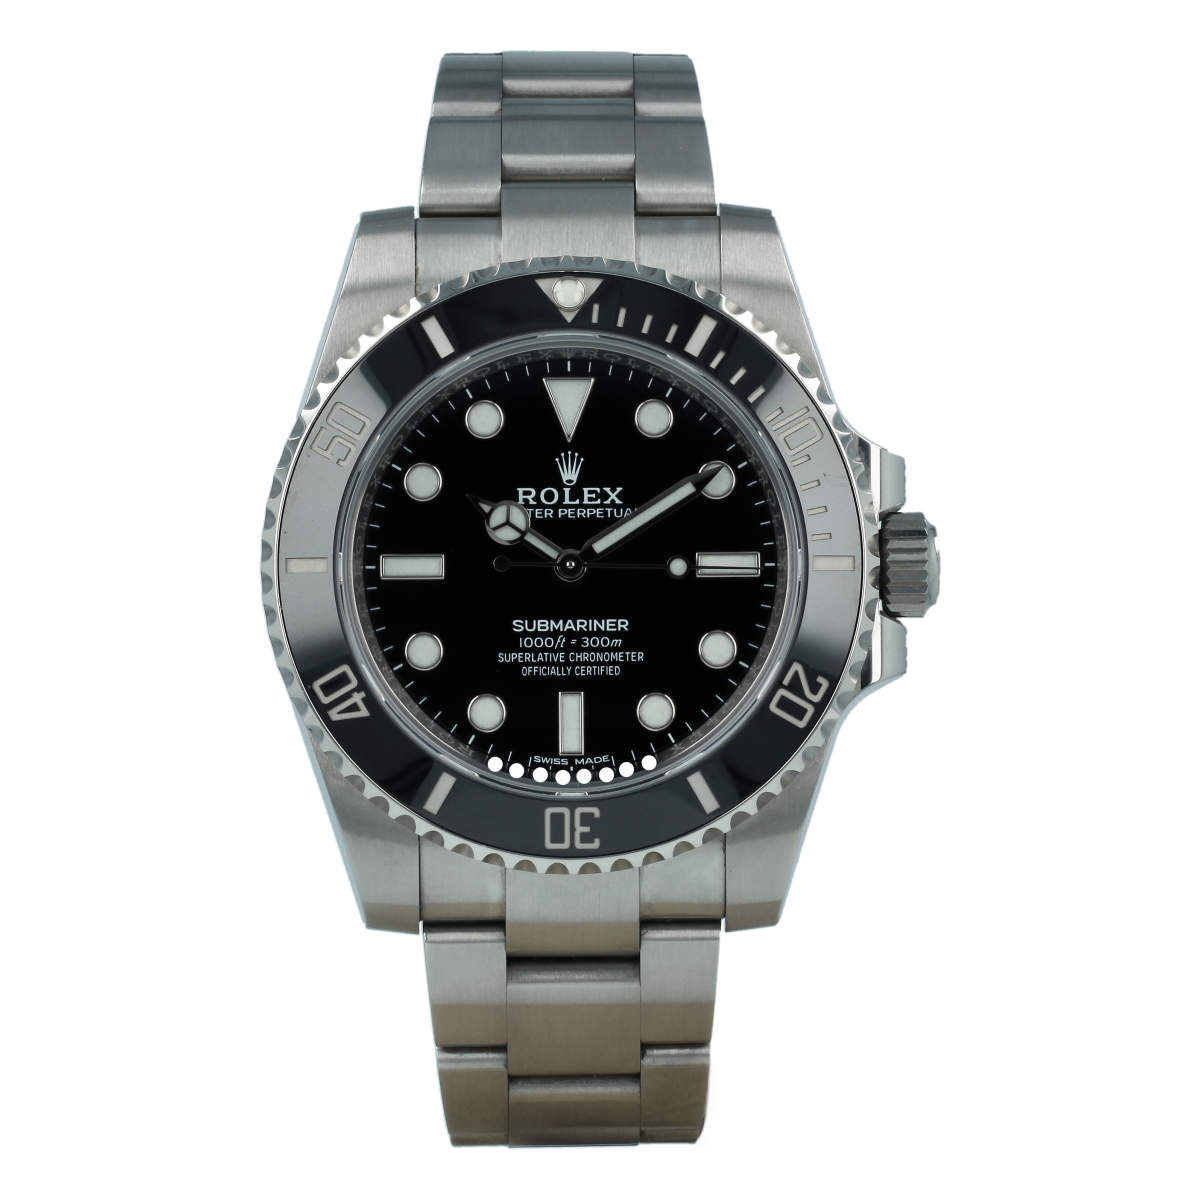 Buy pre-owned Rolex watch | AP Watches 